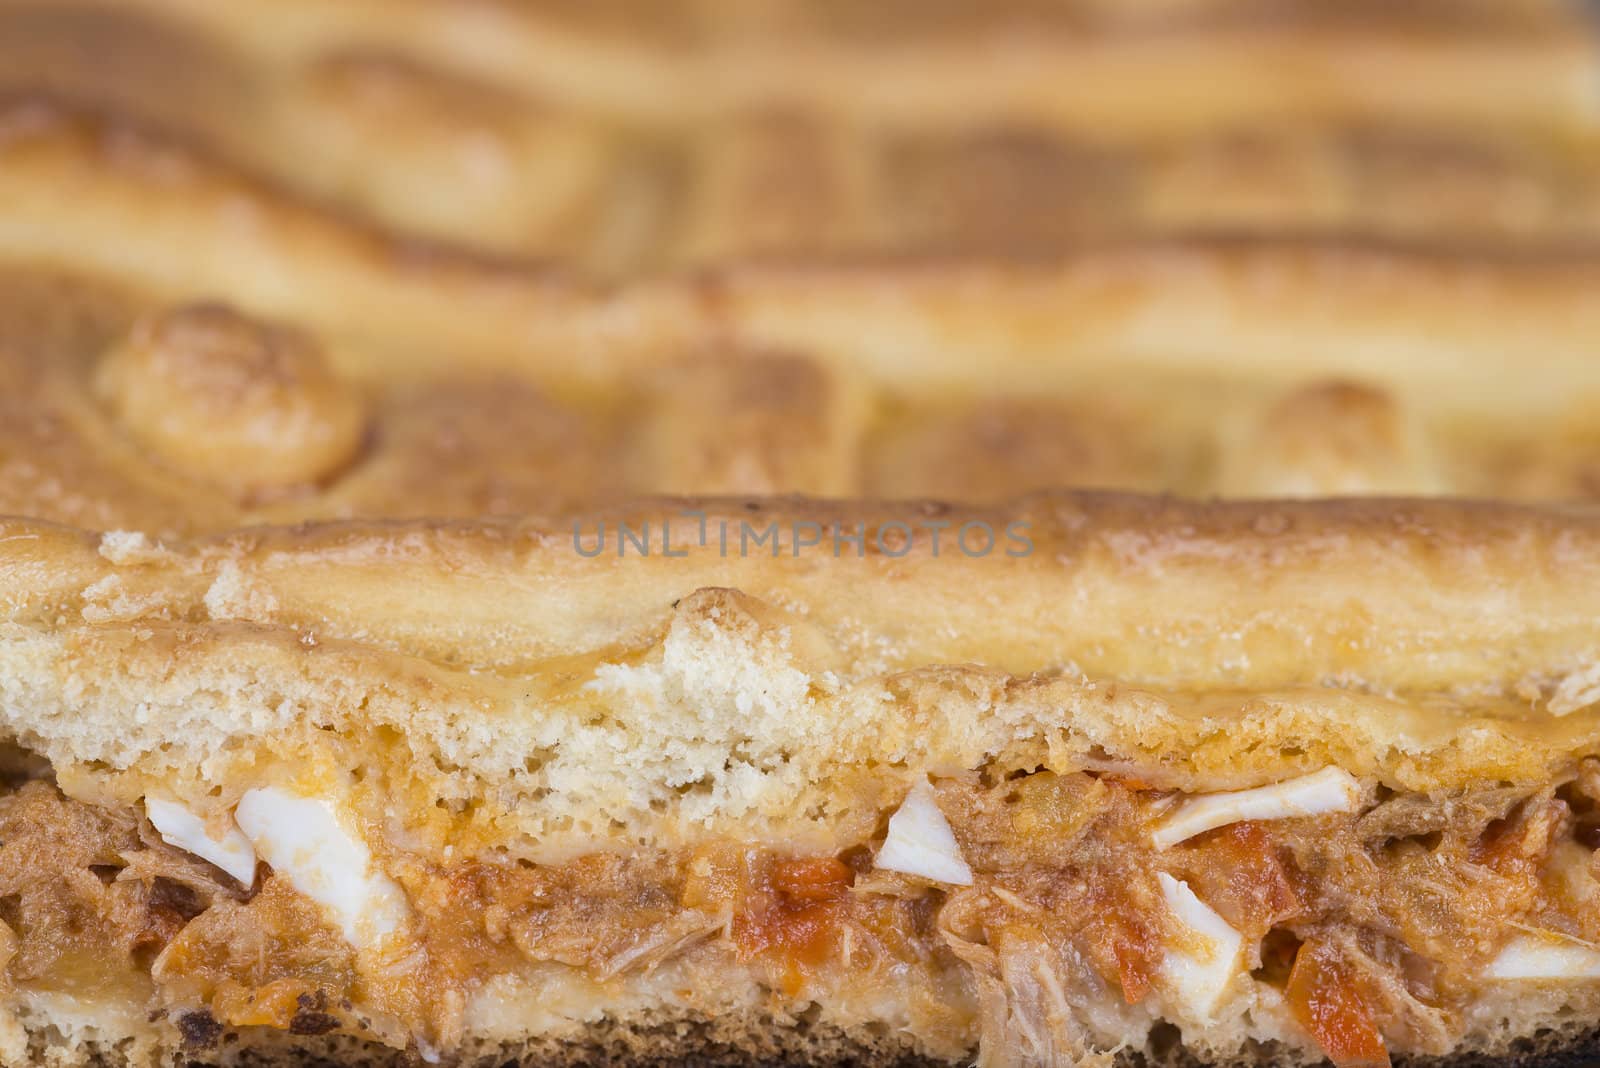 Tuna pie cut showing its texture and fill